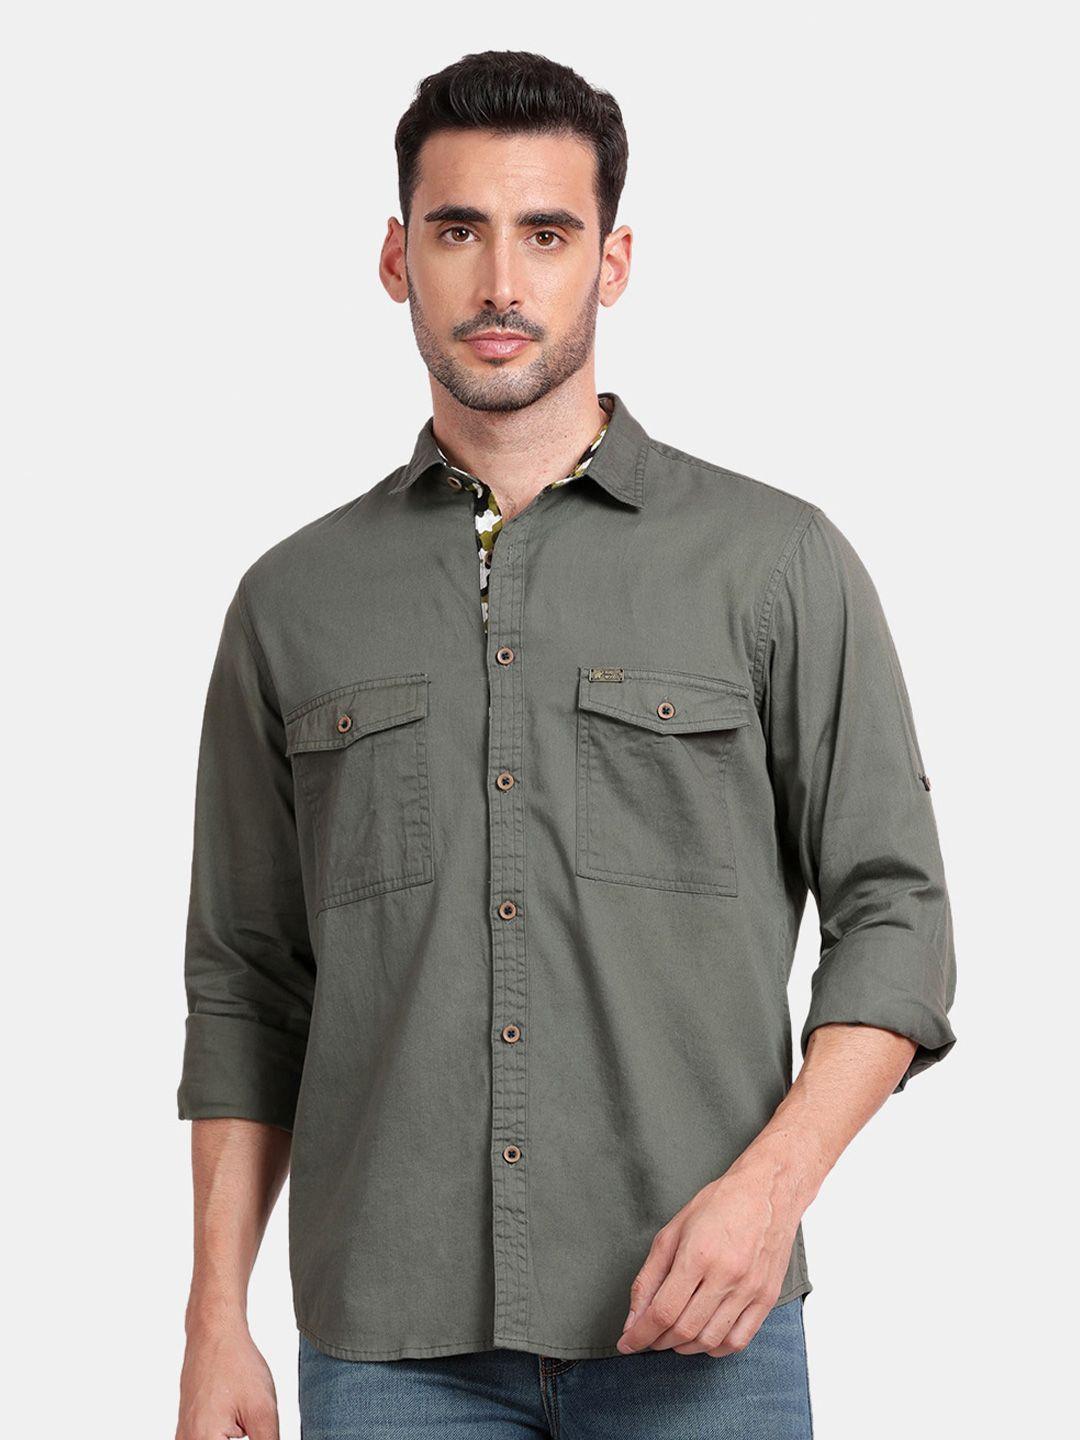 rug-woods-classic-spread-collar-cotton-casual-shirt